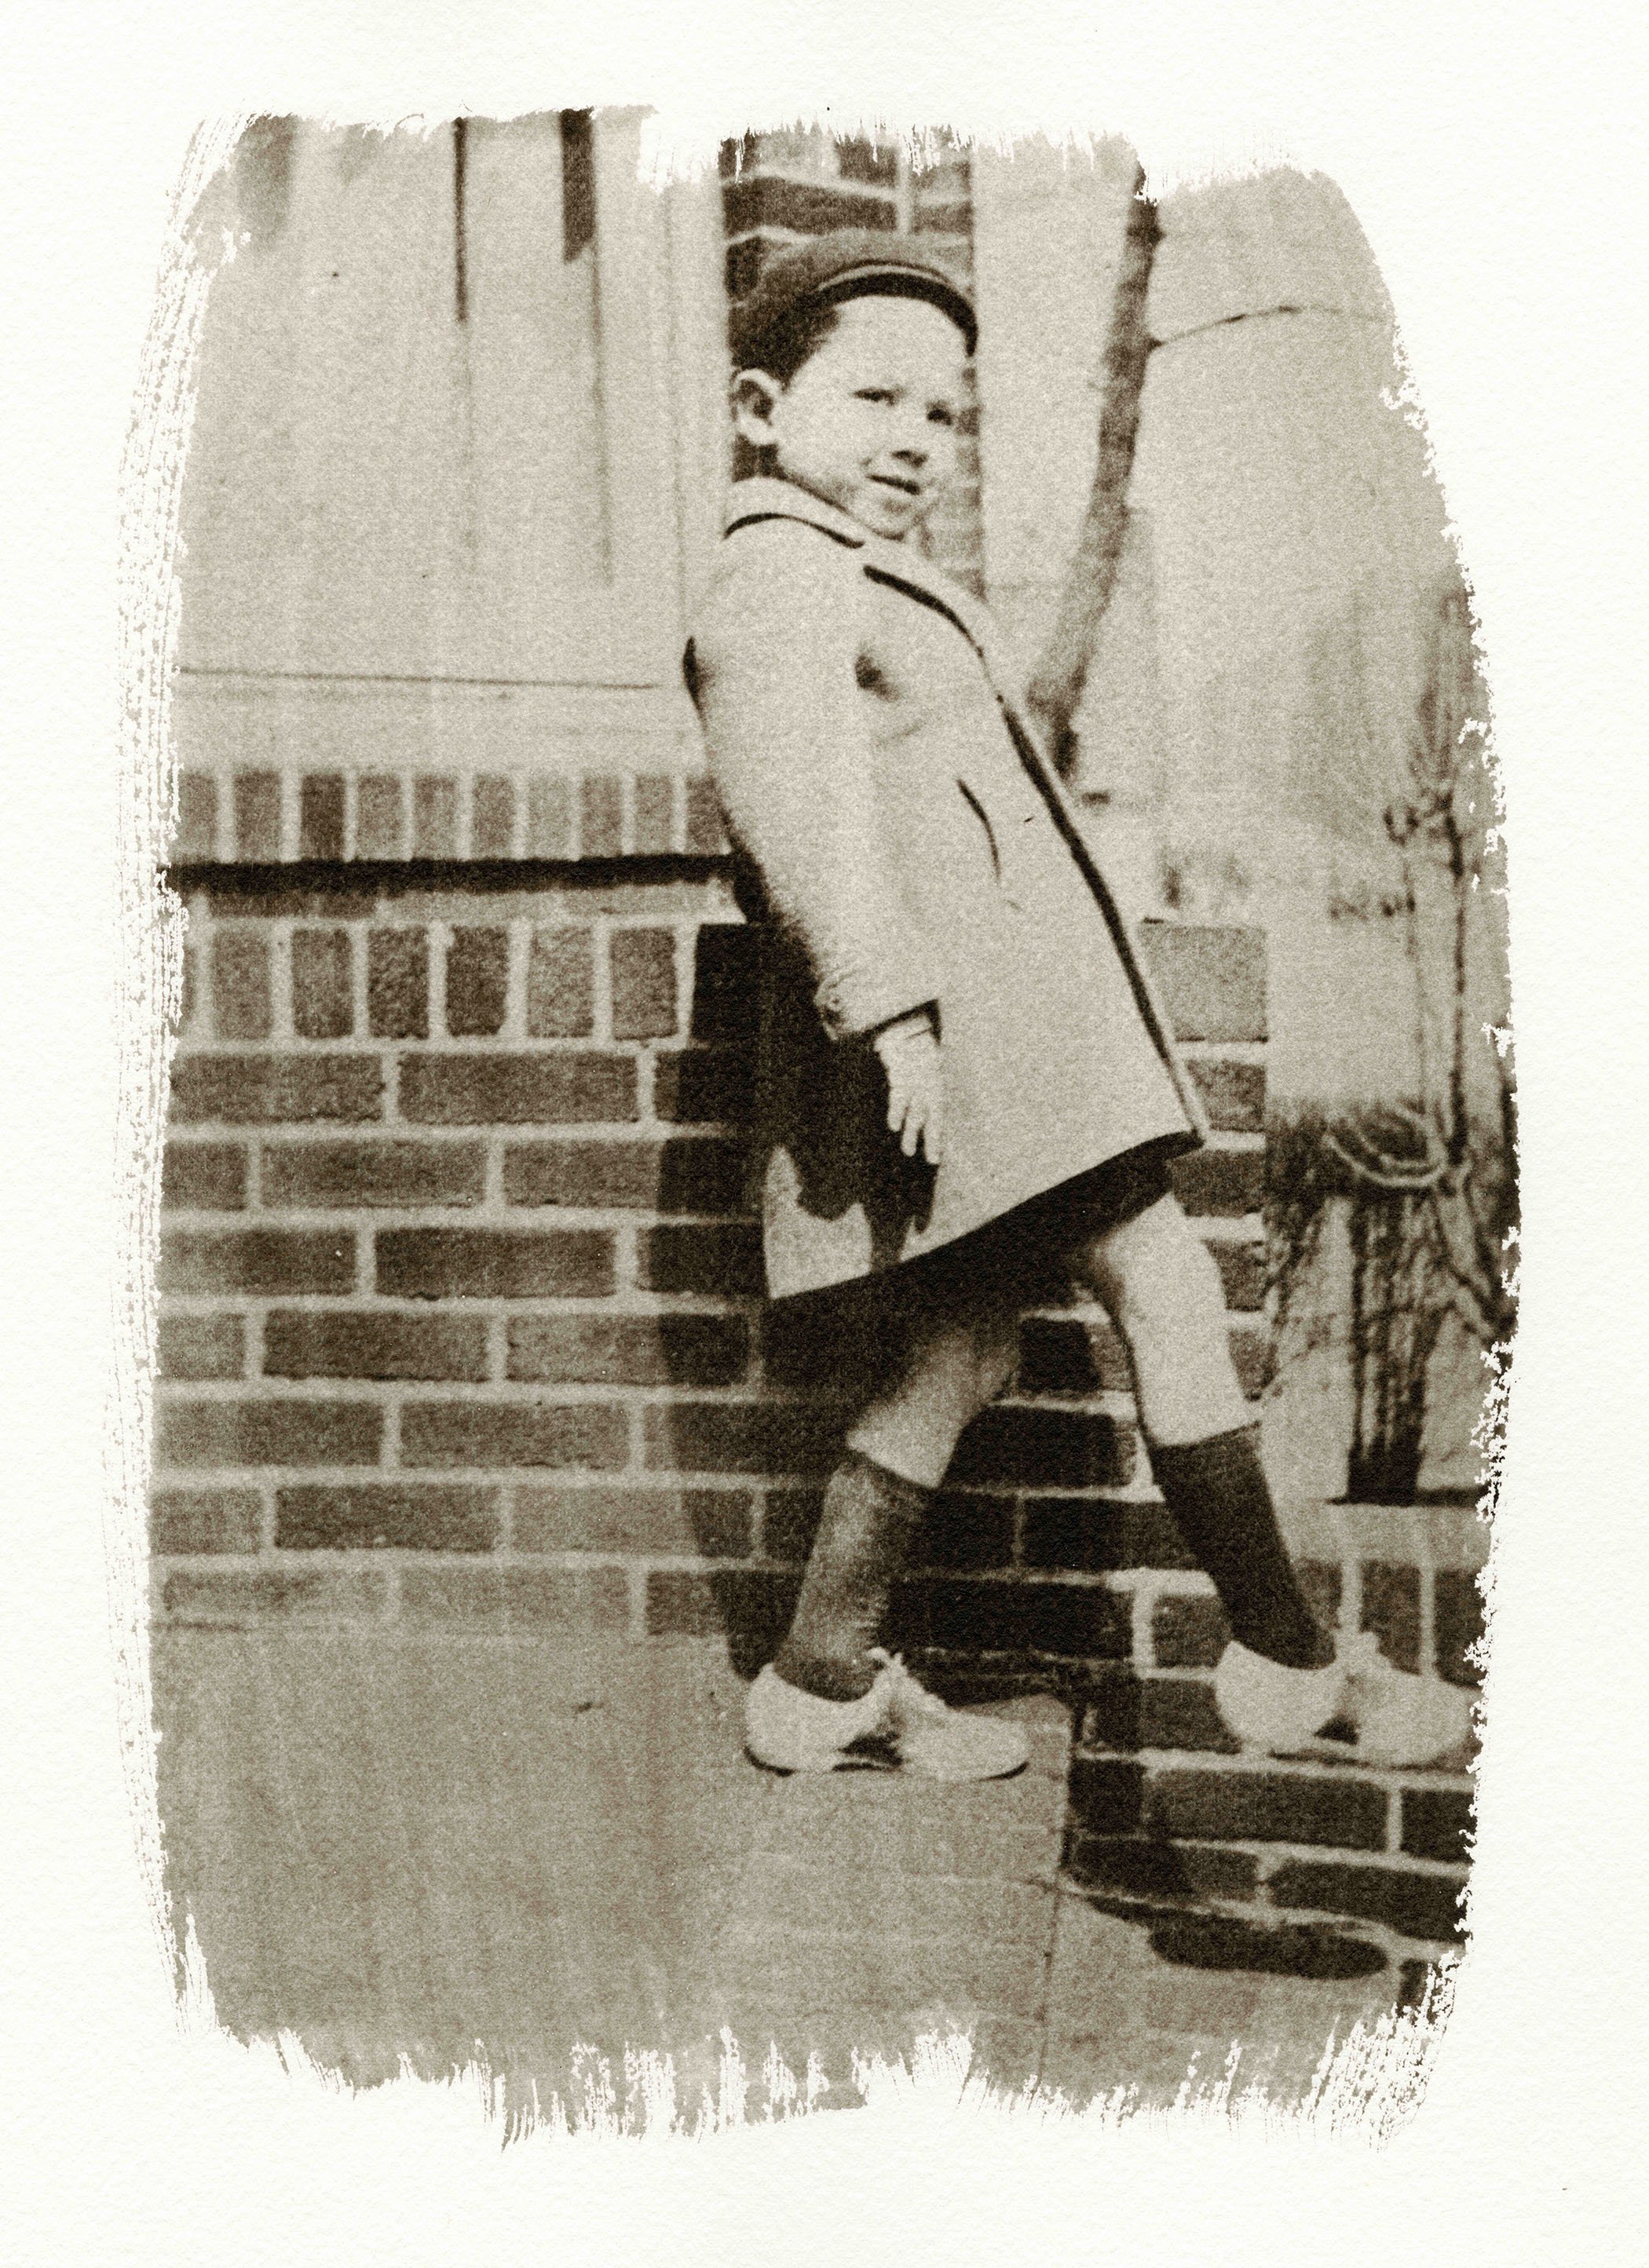 My Father as a Boy, the Bronx, 1940